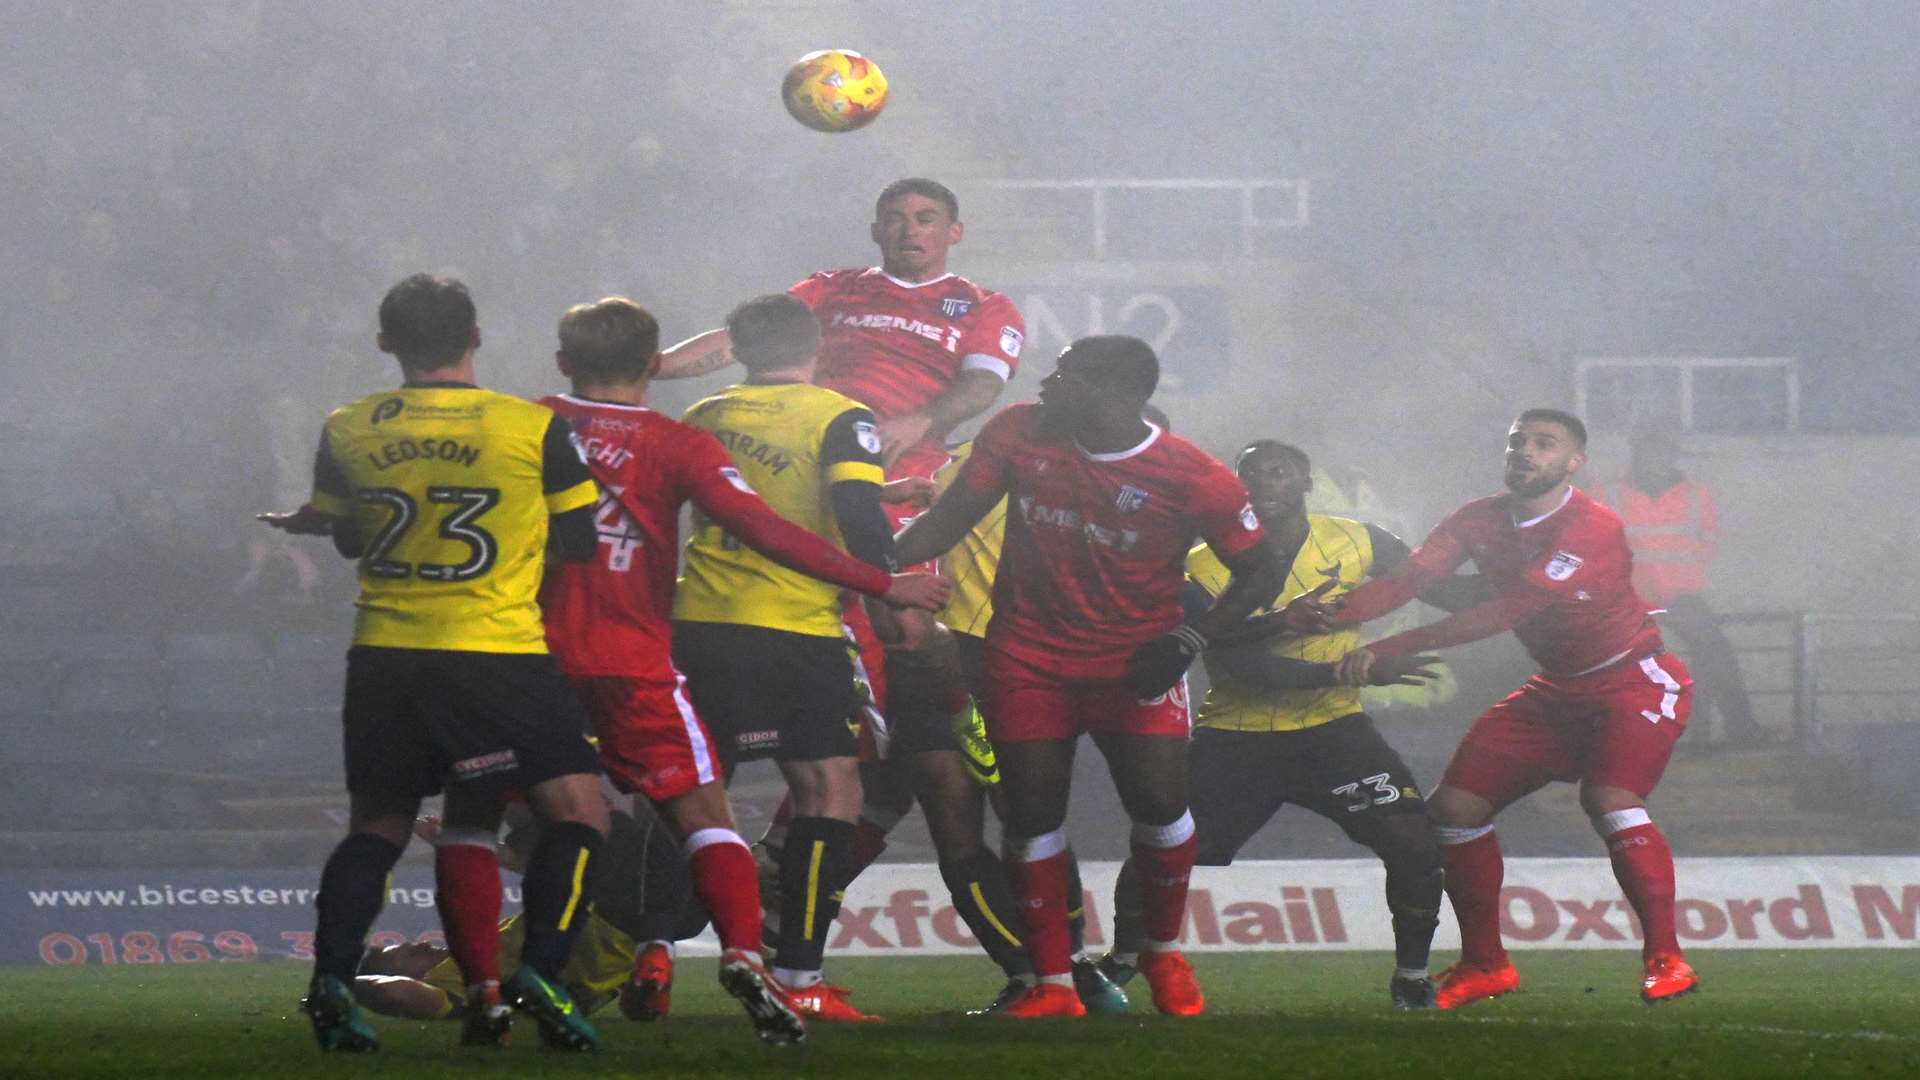 Gillingham challenge for the ball in foggy conditions Picture: Barry Godwin